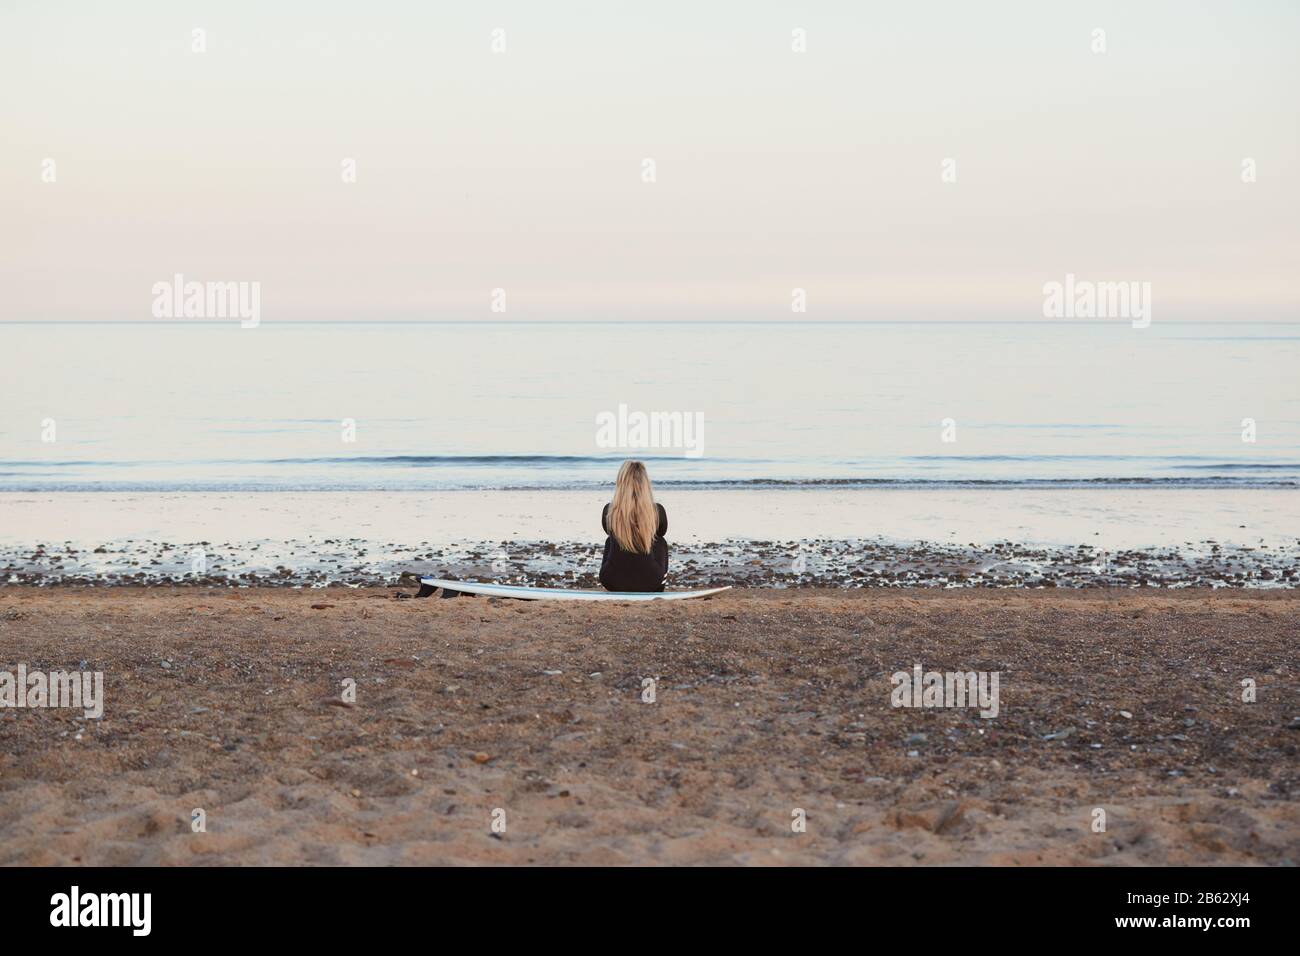 Rear View Of Thoughtful Woman Wearing Wetsuit On Surfing Staycation Looking Out To  Sea At Waves Stock Photo